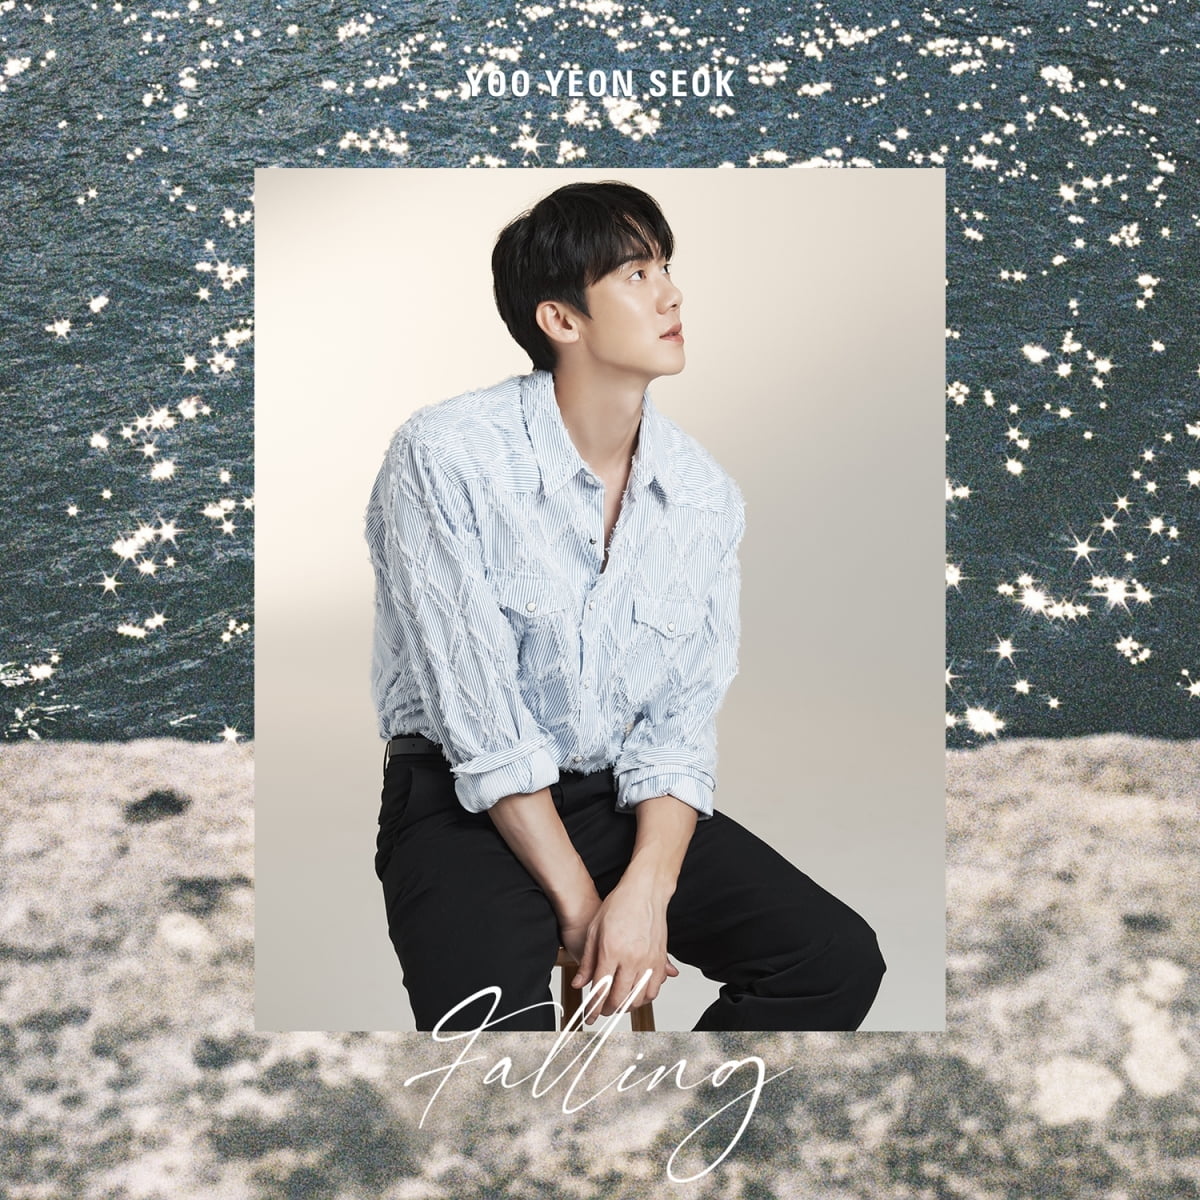 Yoo Yeon-seok releases fan song ‘Falling’ to commemorate 20th anniversary of debut